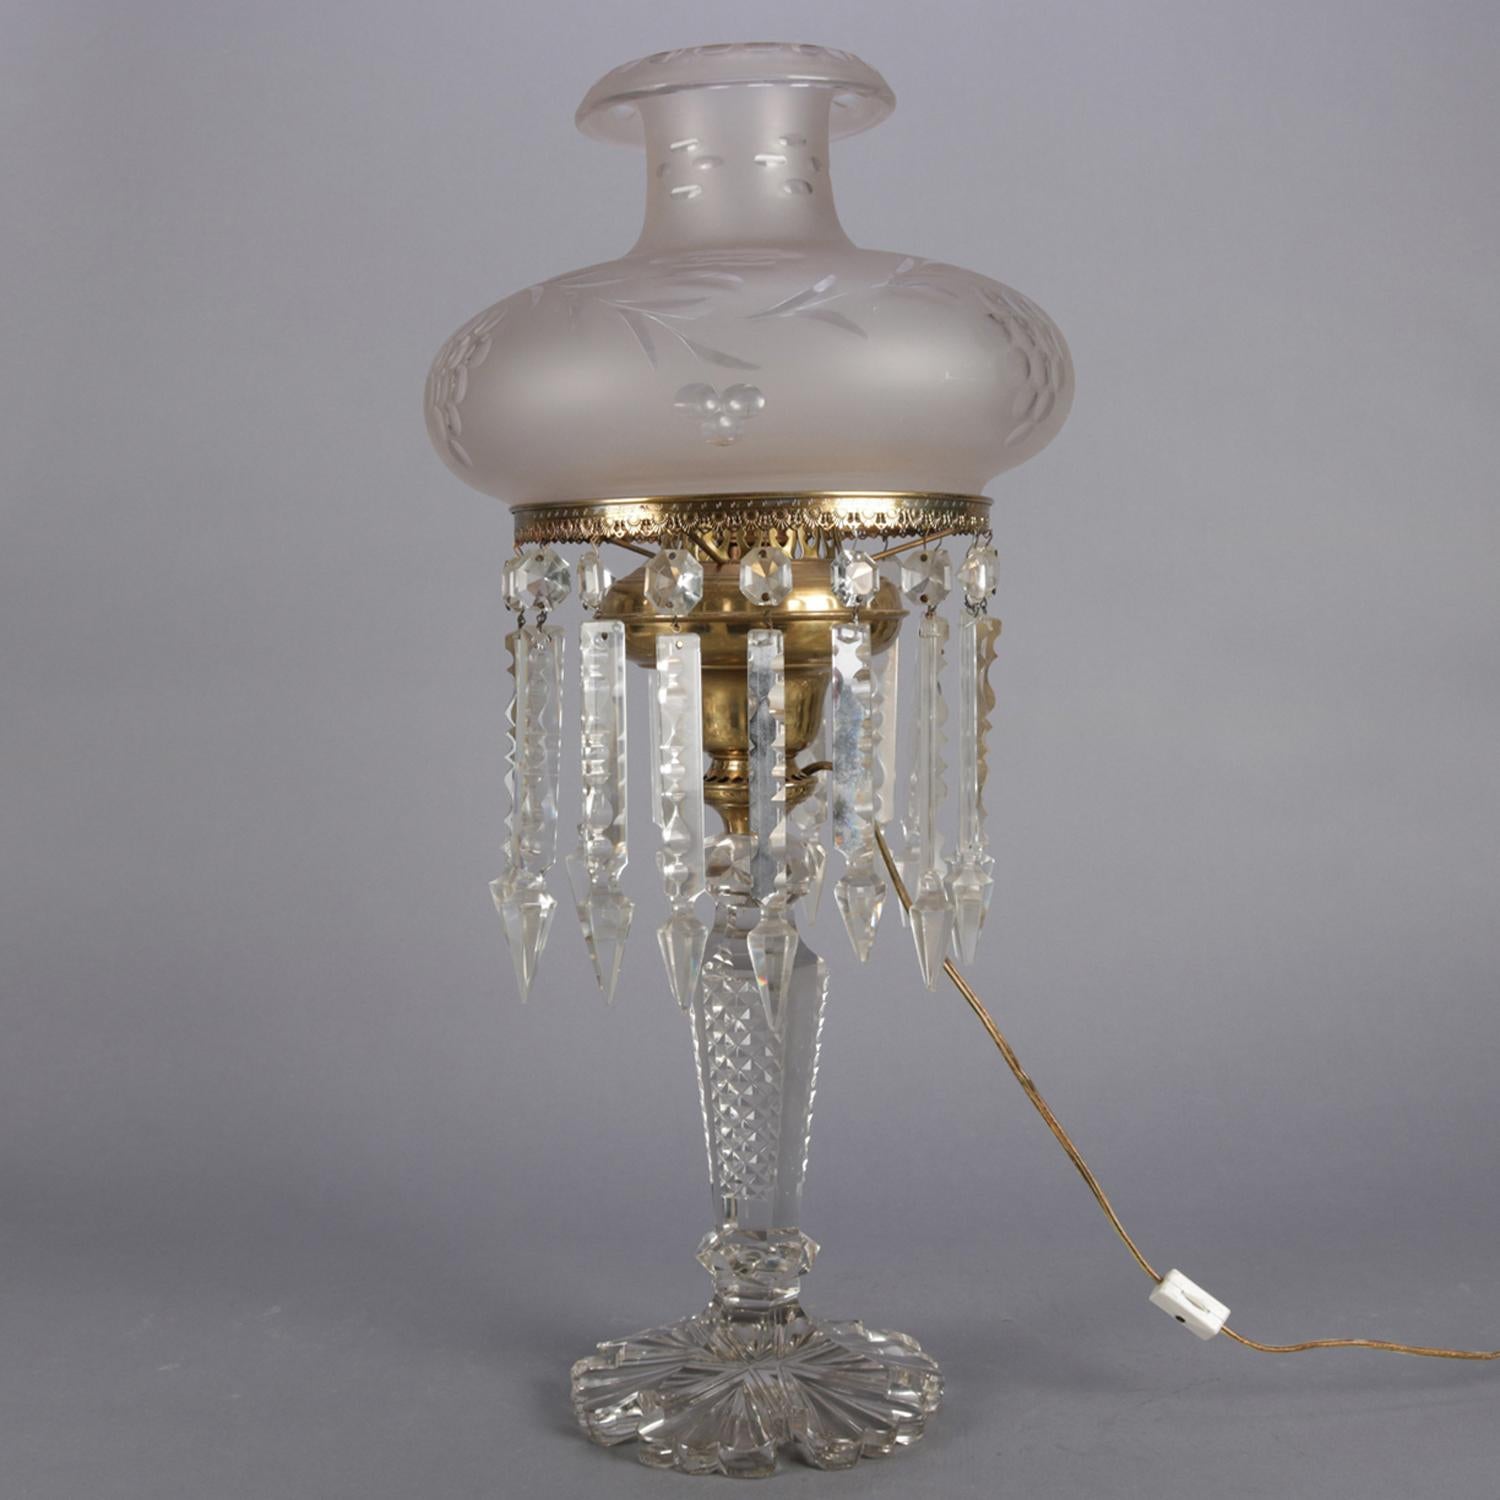 Antique crystal J.G Webb solar lamp features brass font over pressed glass base having tapered and diamond patterned column over foot reminiscent of snowflake design, frosted glass shade with floral and foliate design and seated on fitter with